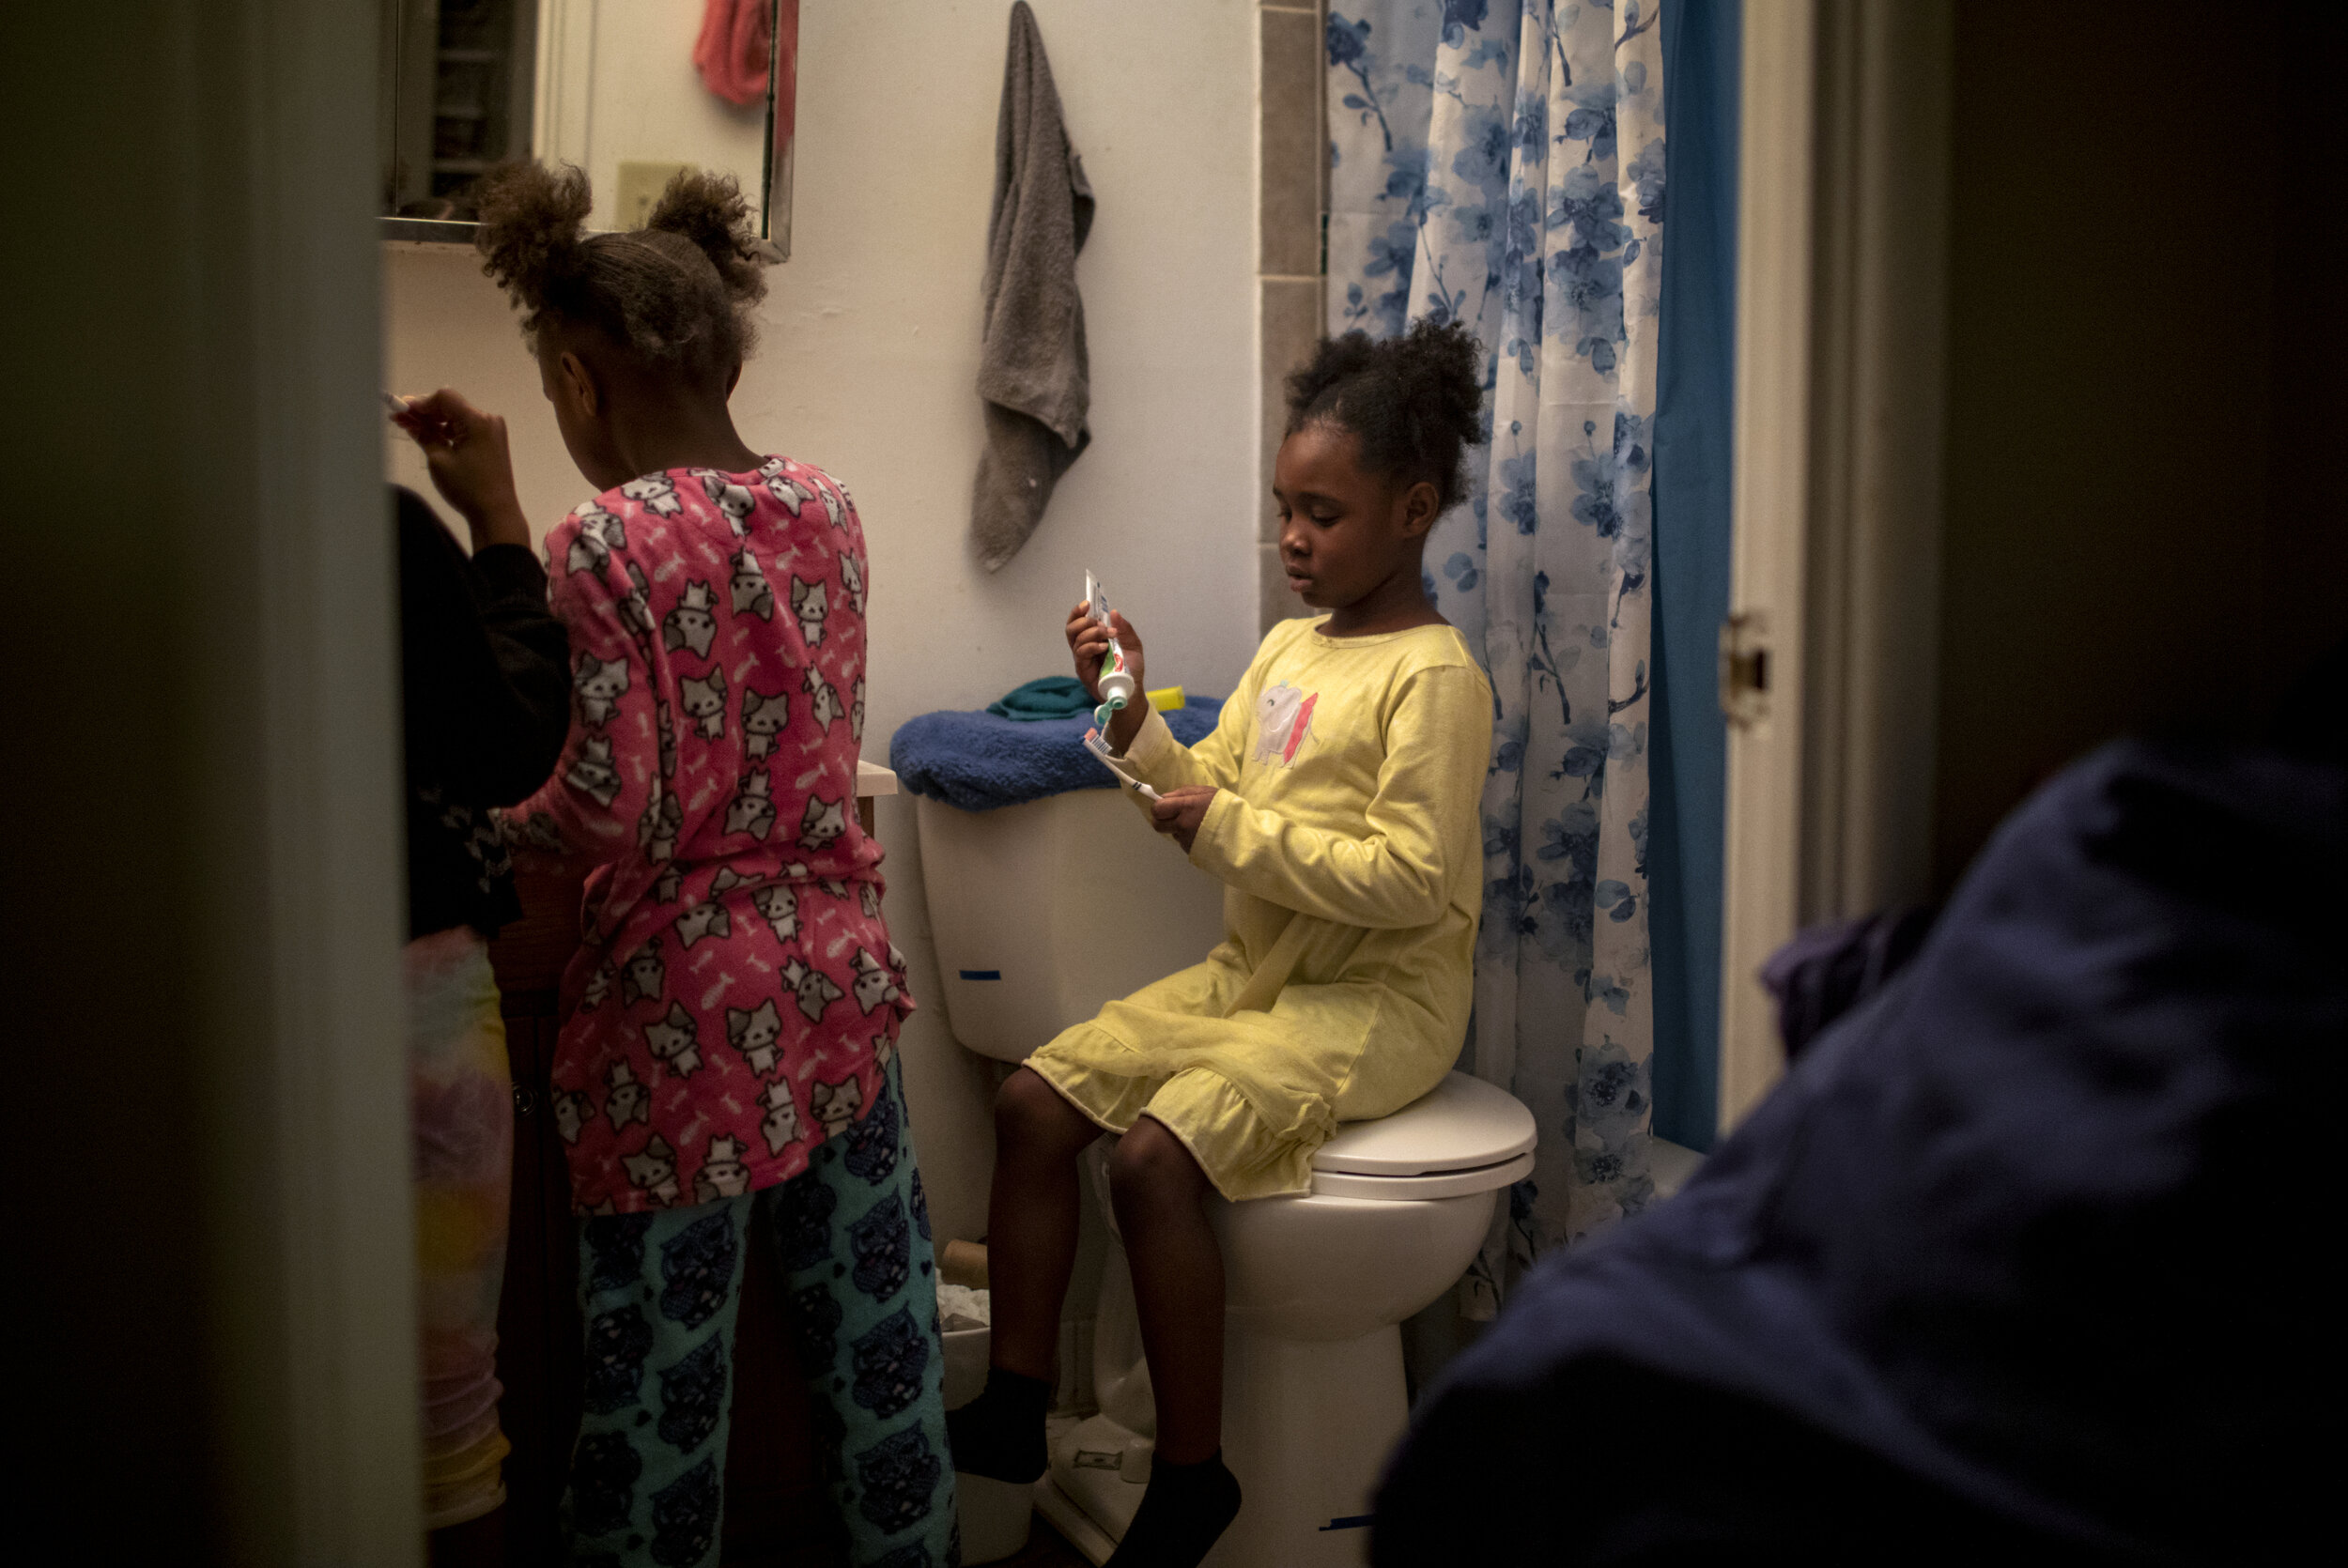  Angelina, 7, puts toothpaste on her toothbrush while her sisters brush their teeth. 